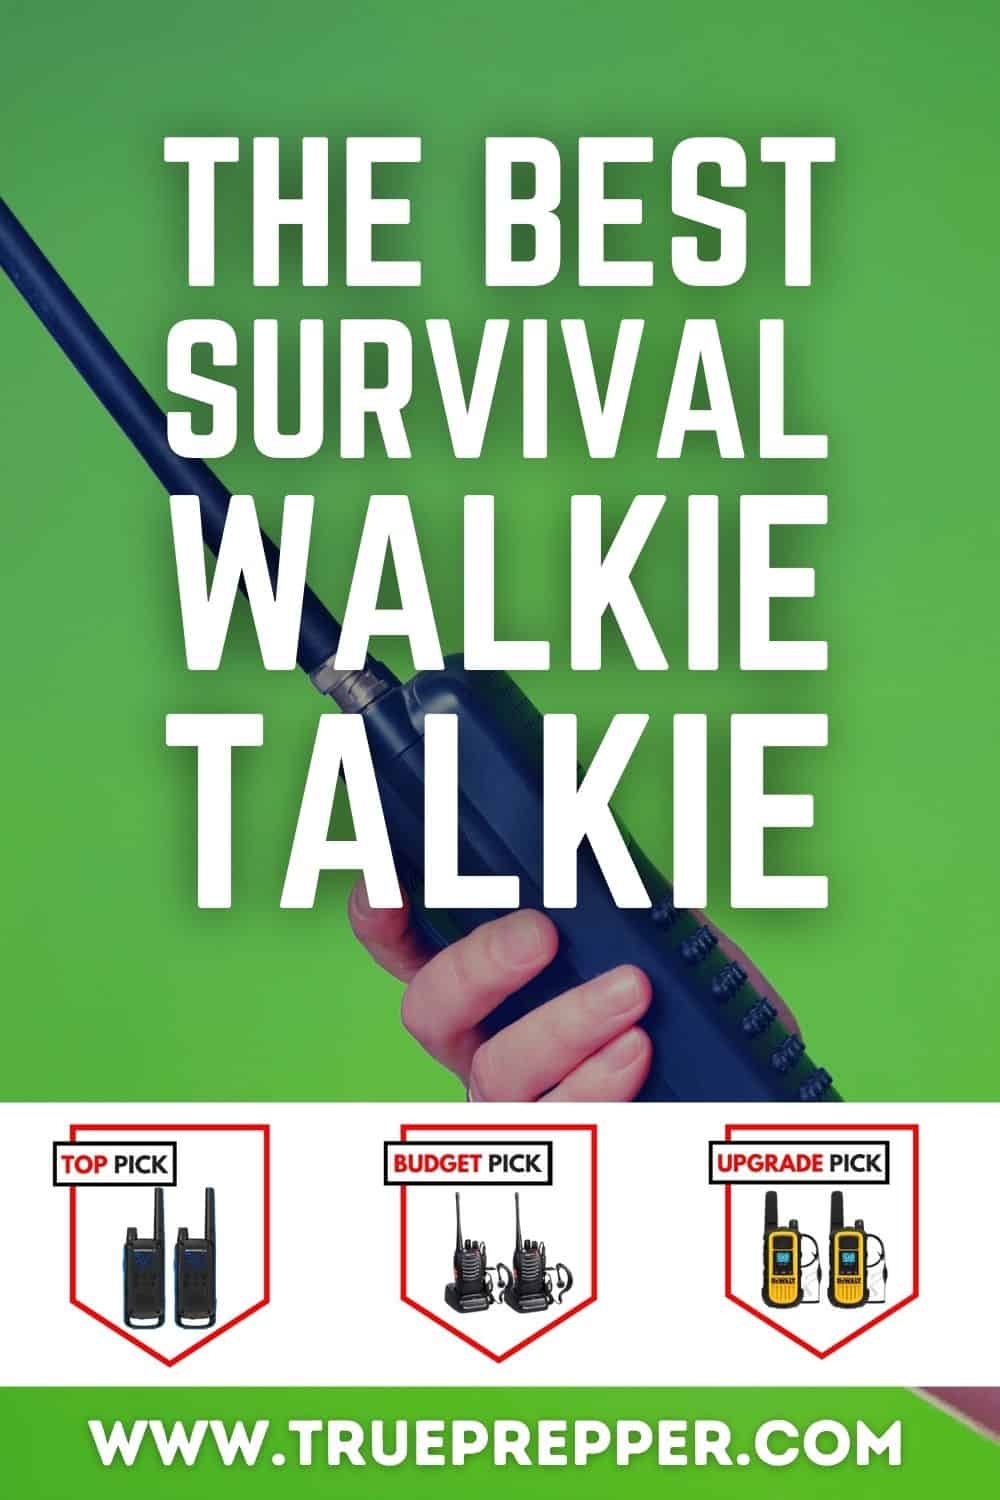 The Best Survival Walkie Talkie for Emergencies and Prepping.